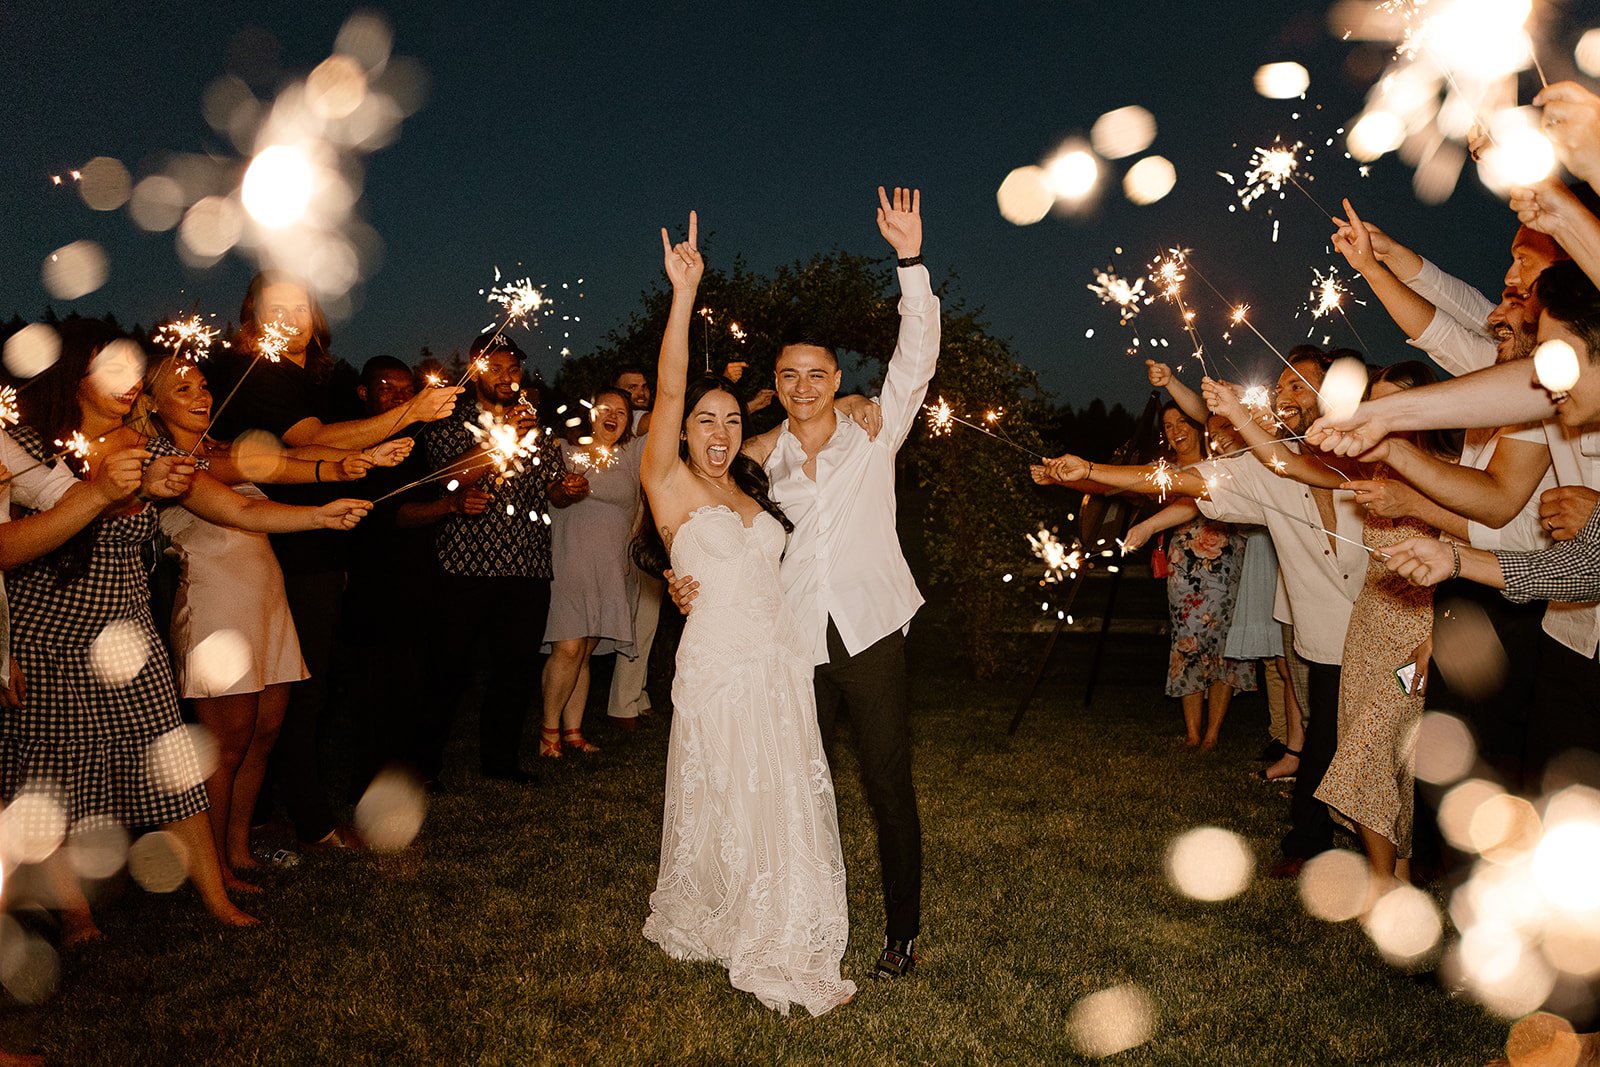 bride and groom fist pumping in celebration during their sparkler exit at their wedding reception